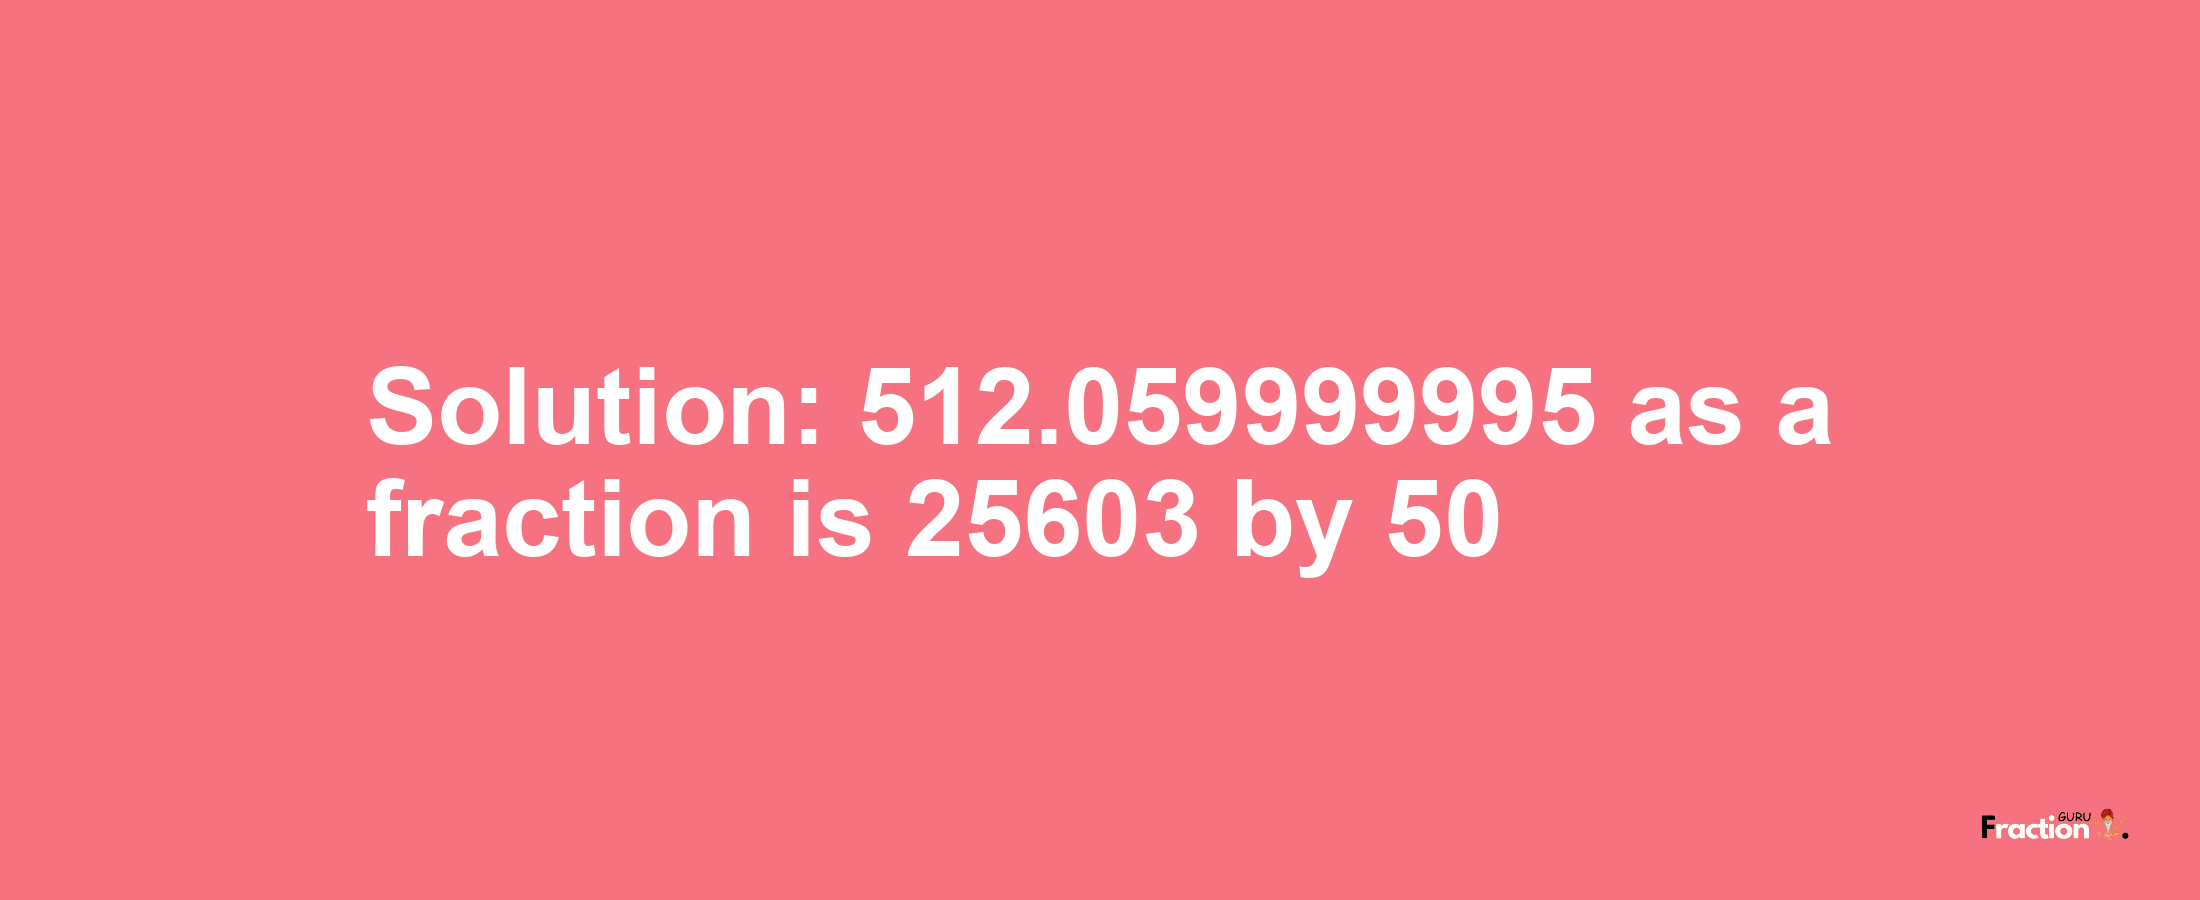 Solution:512.059999995 as a fraction is 25603/50